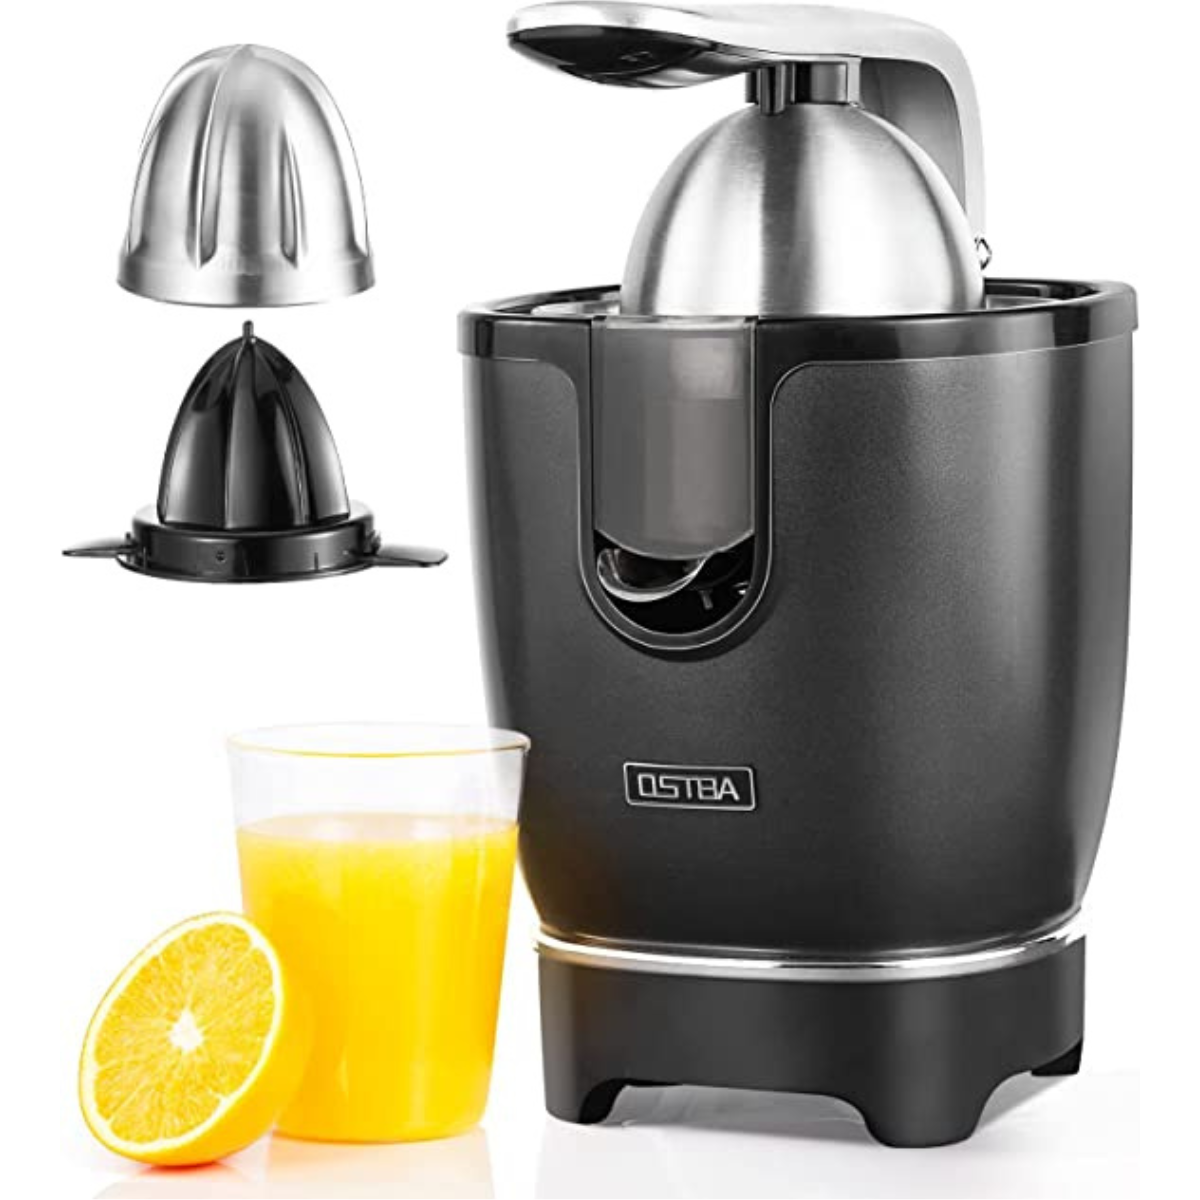 OSTBA Electric Citrus Juicer Effortlessly Squeeze Fresh Juice, by  iohhjghjhj